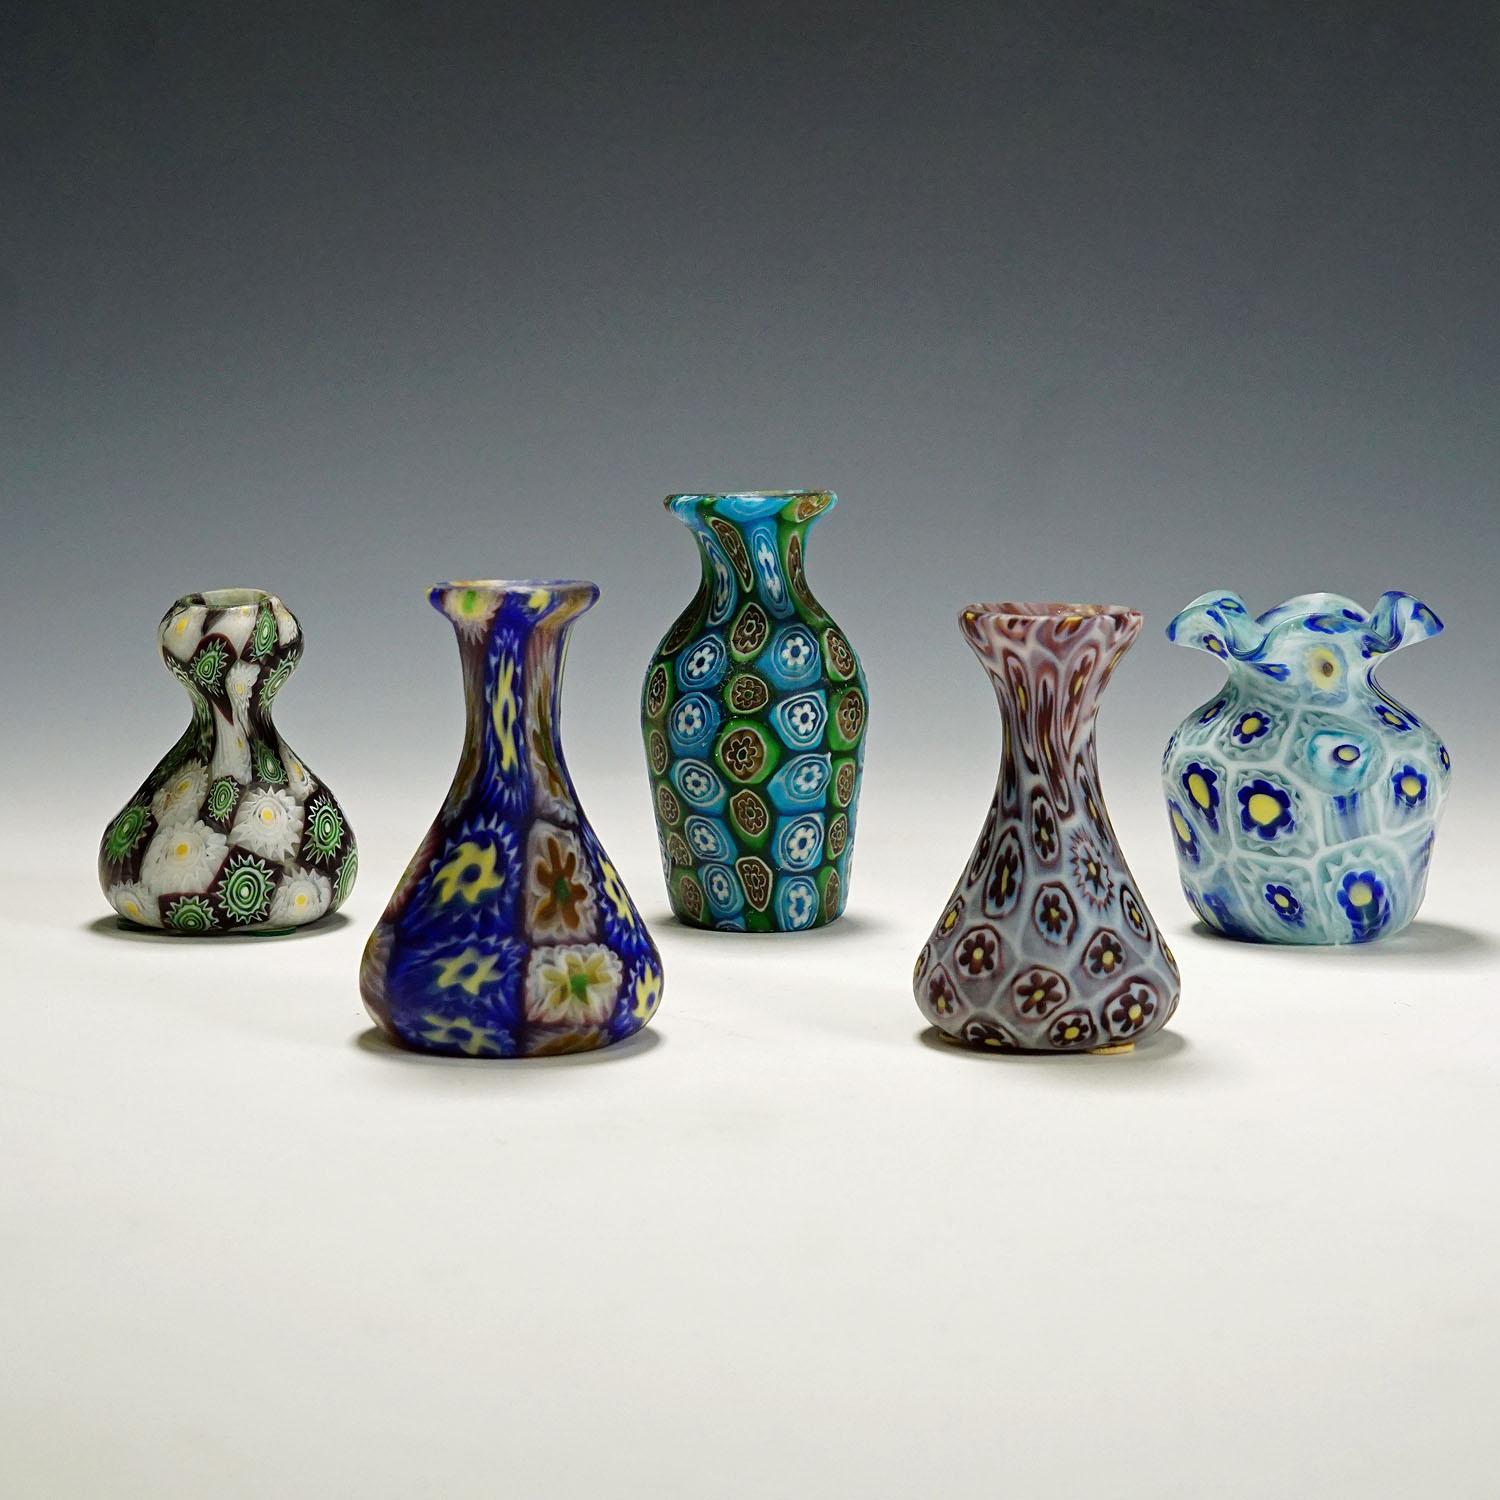 Set of five Millefiori vases by Fratelli Toso, Murano circa 1910.

A set of five millefiore murrine glass vases, manufactured by Vetreria Fratelli Toso around 1910-20. All vases are executed with polychrome multicoloured murrines and have an acid